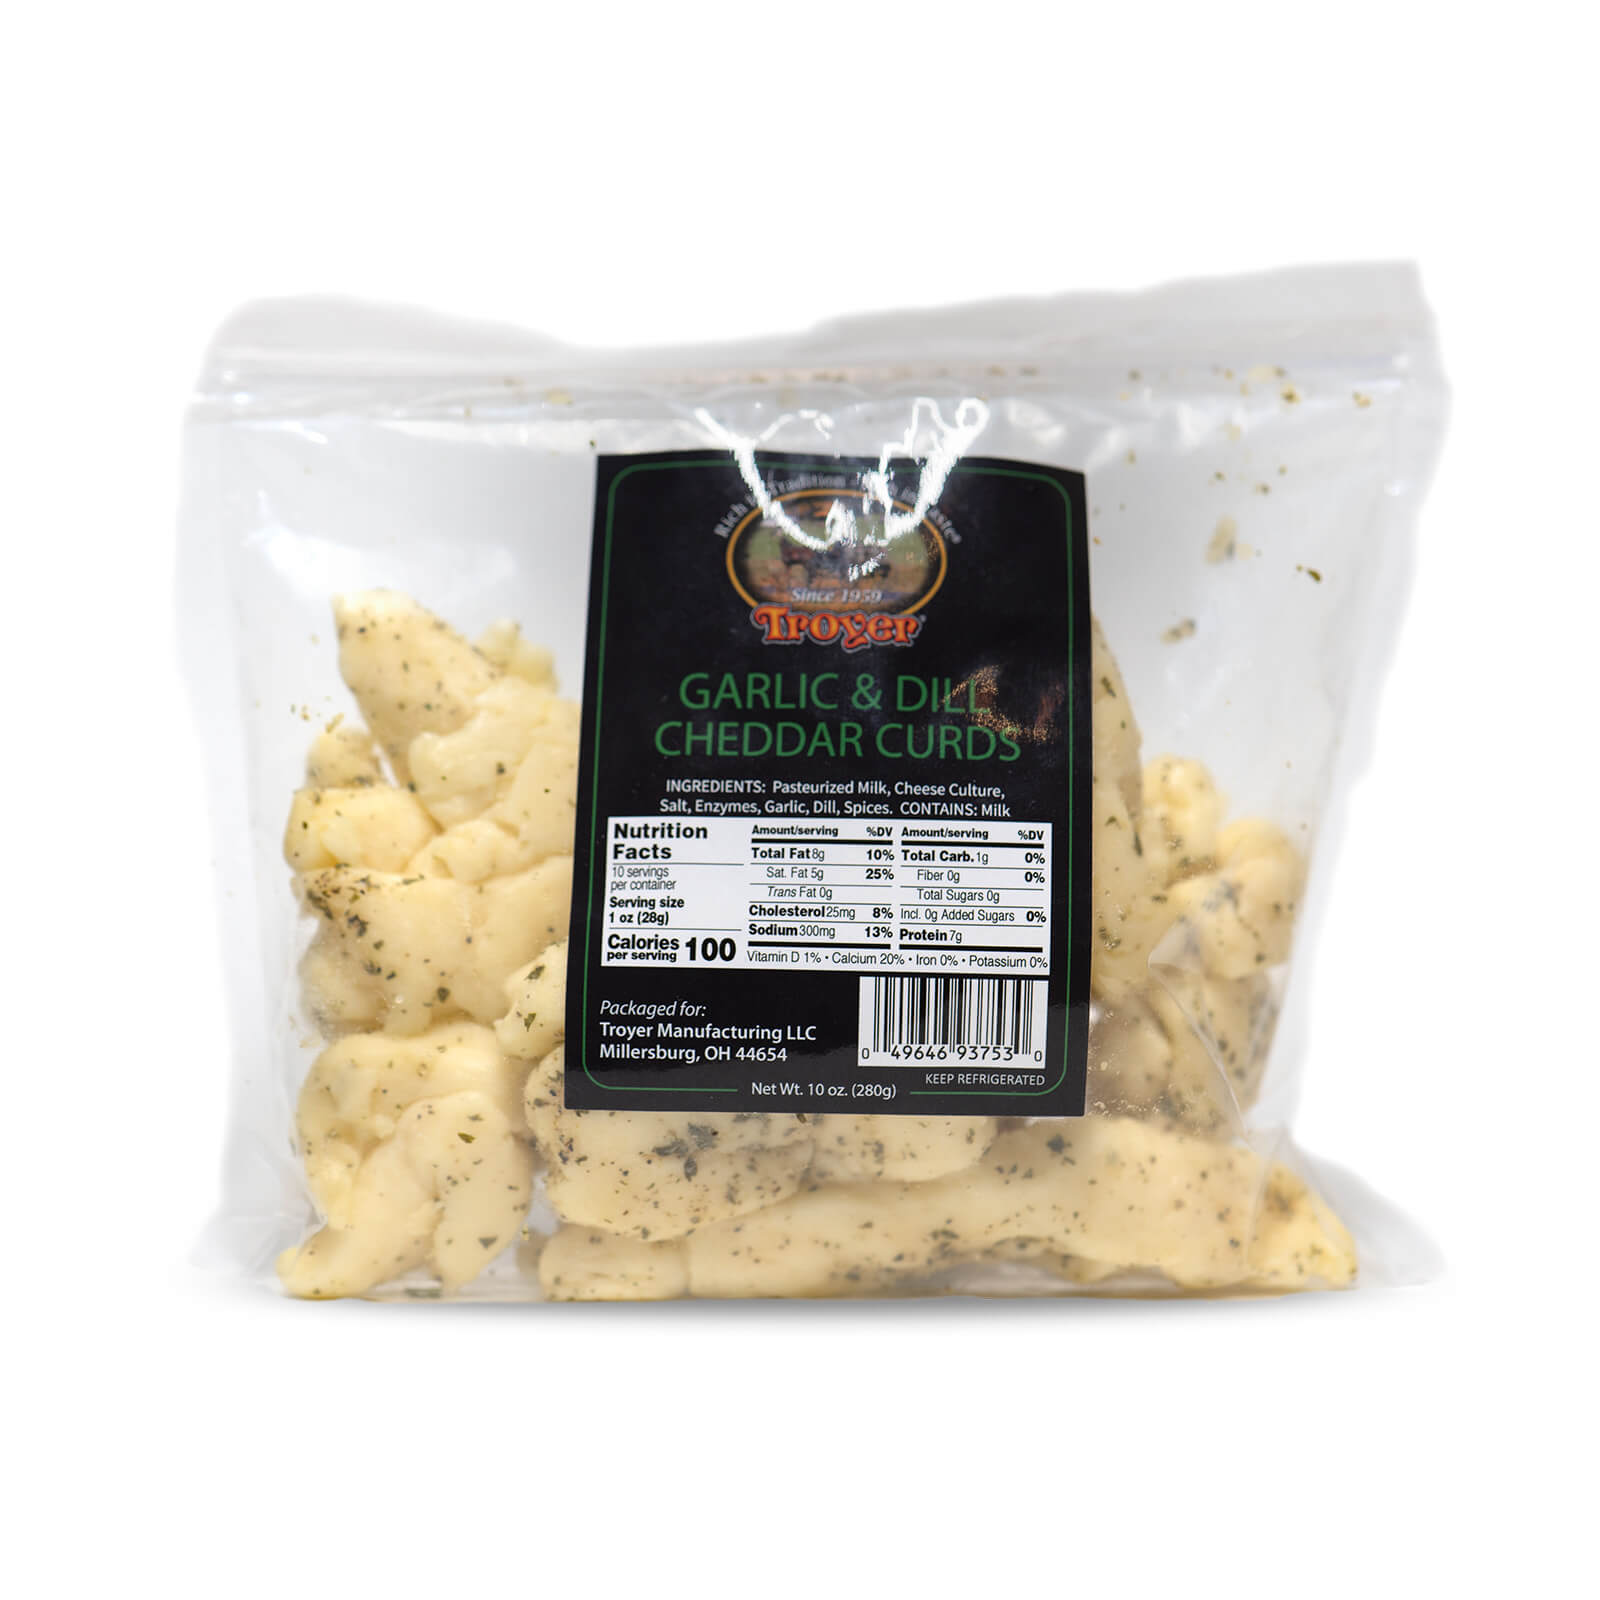 garlic-and-dill-cheddar-cheese-curds-by-troyer-farm-fixins-dot-com